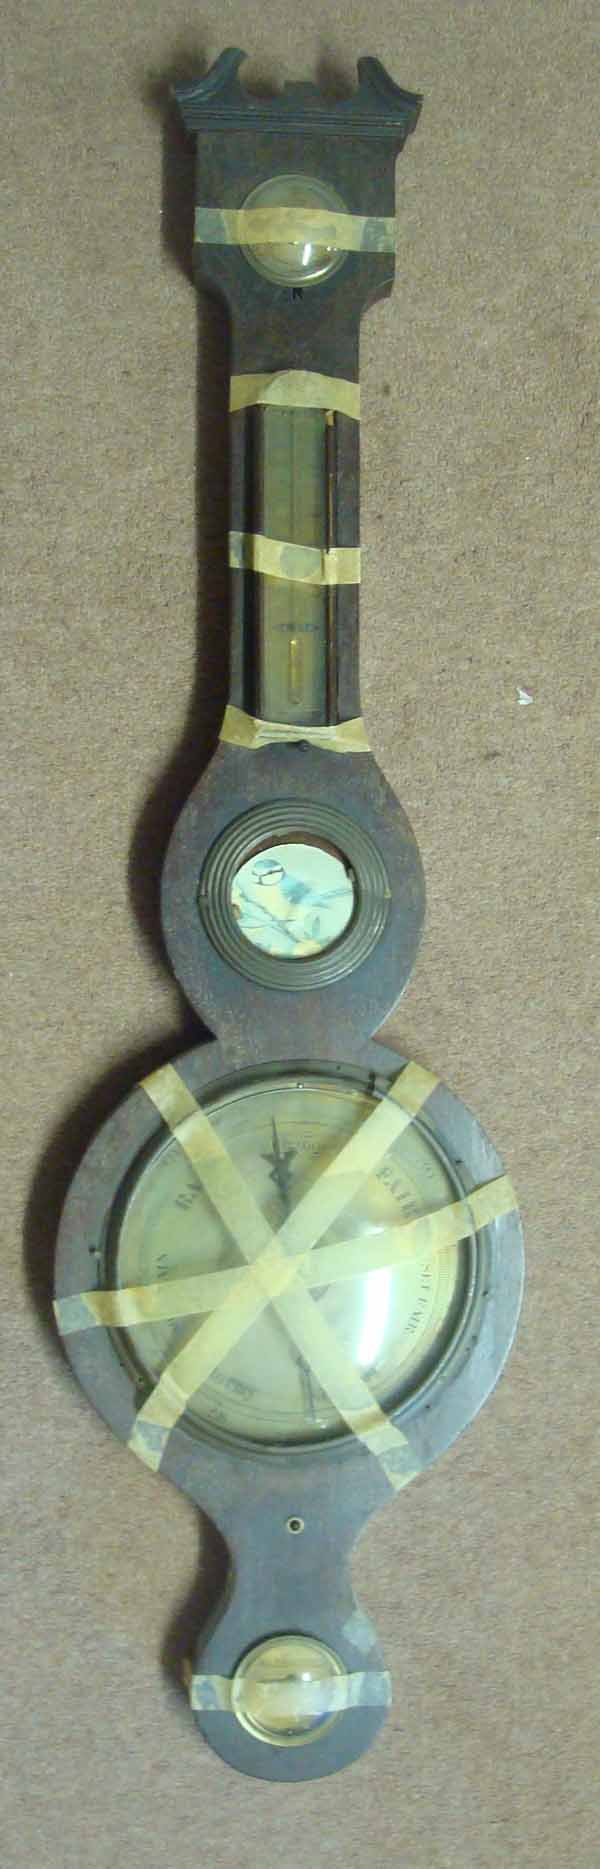 19th/20th Barometer: Having Dry / Damp Dial, Thermometer, and barometer dial in shaped wooden casing